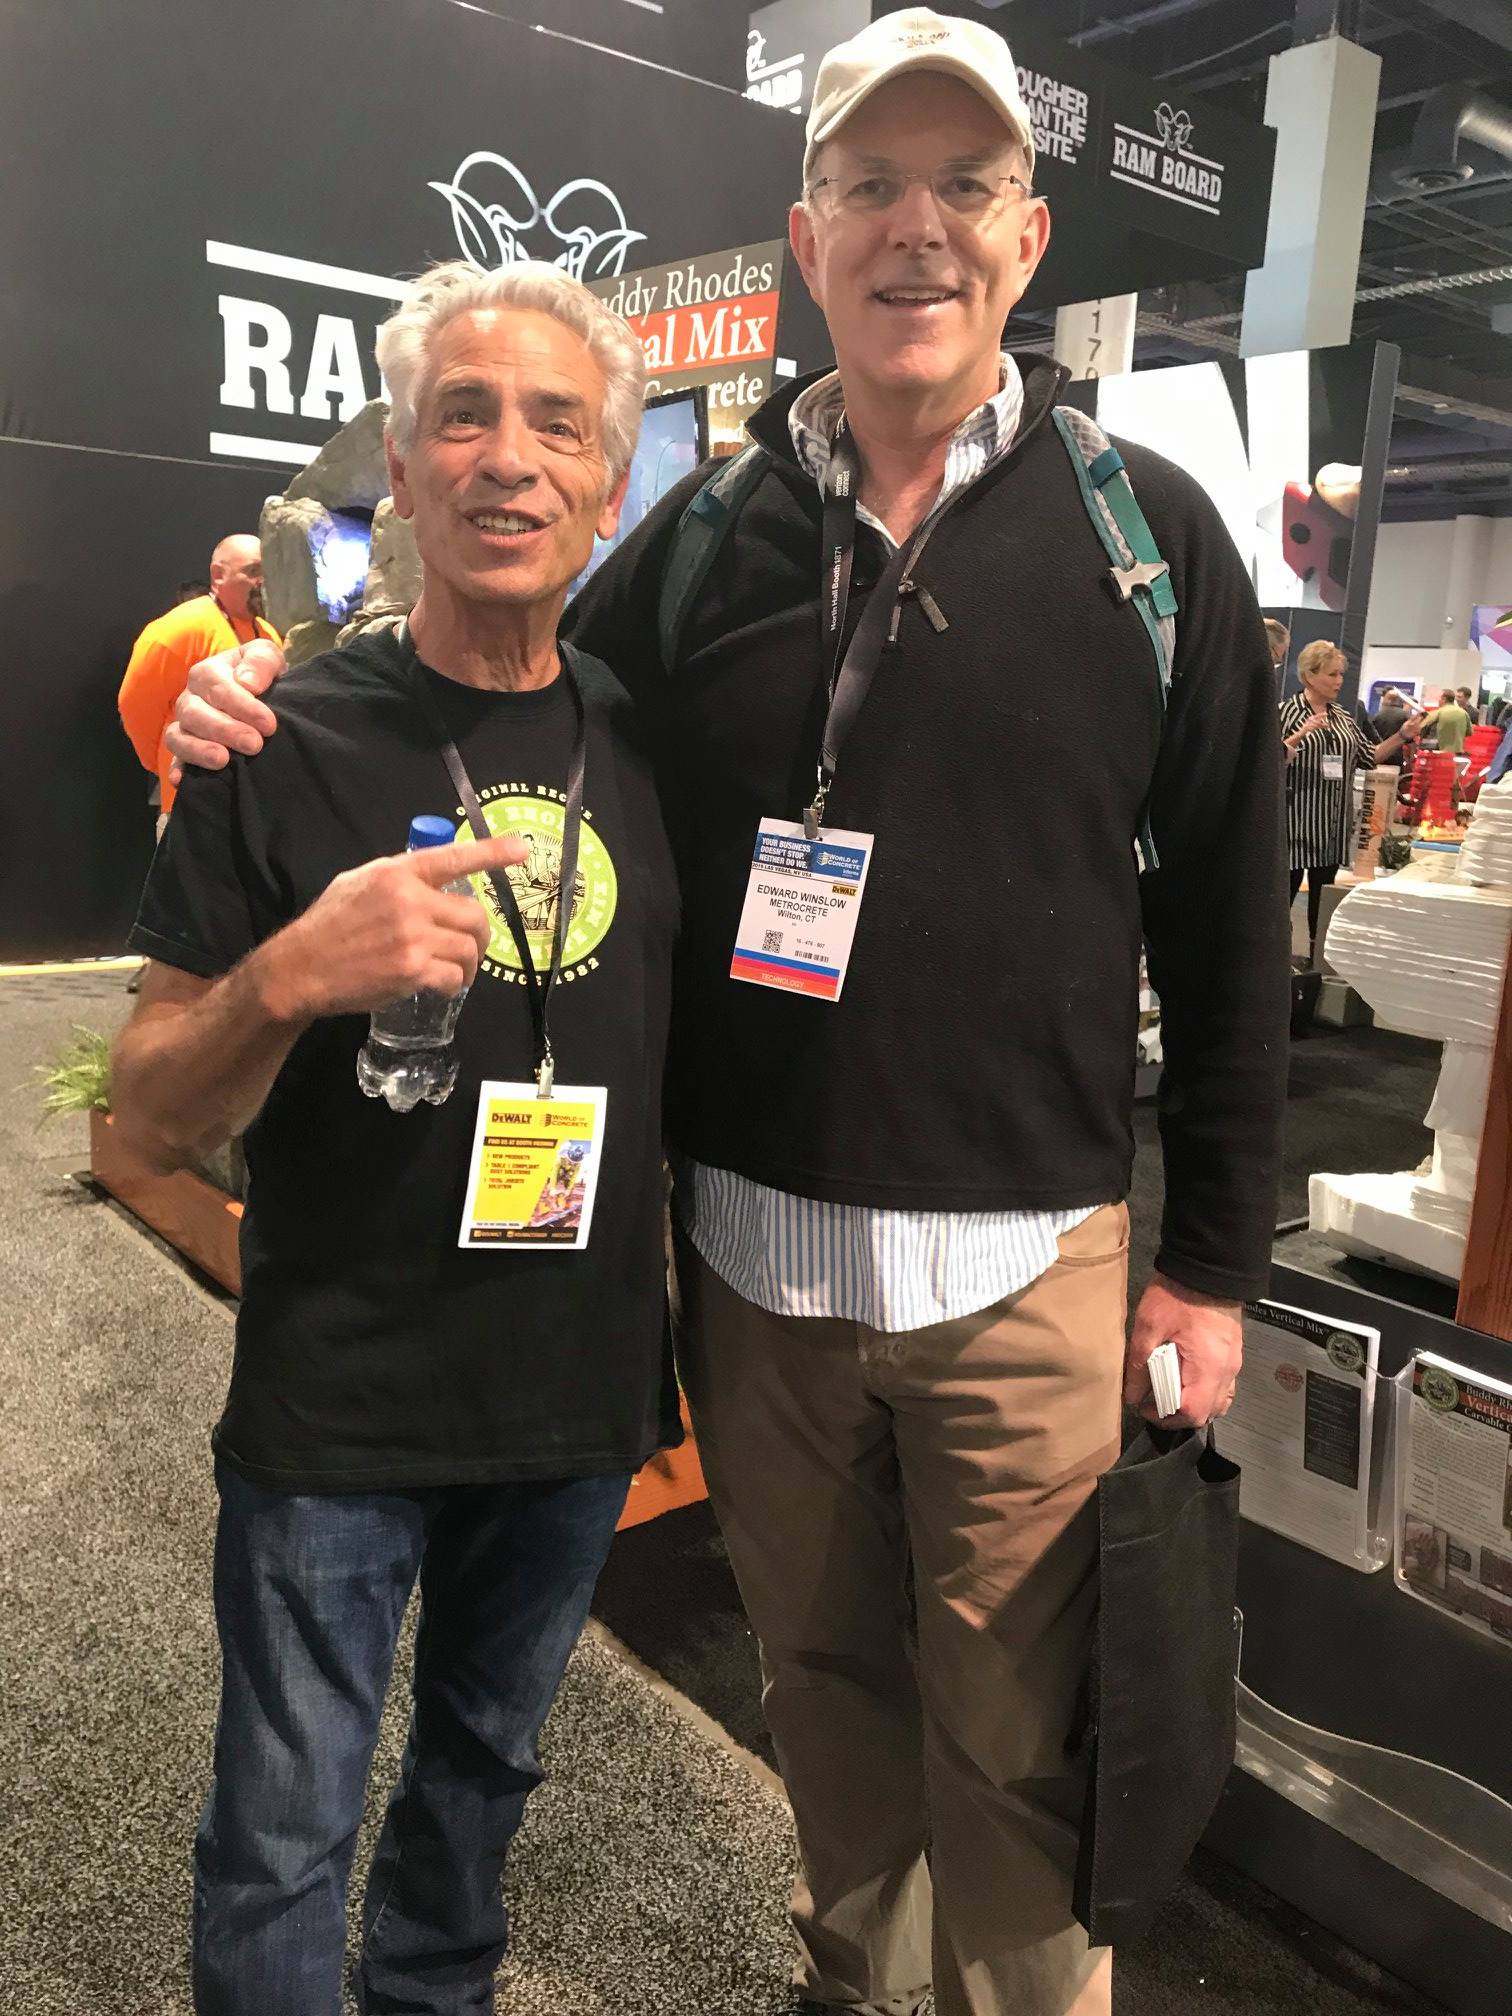 Our founder Ed Winslow with Buddy Rhodes at World of Concrete 2019, Las Vegas.